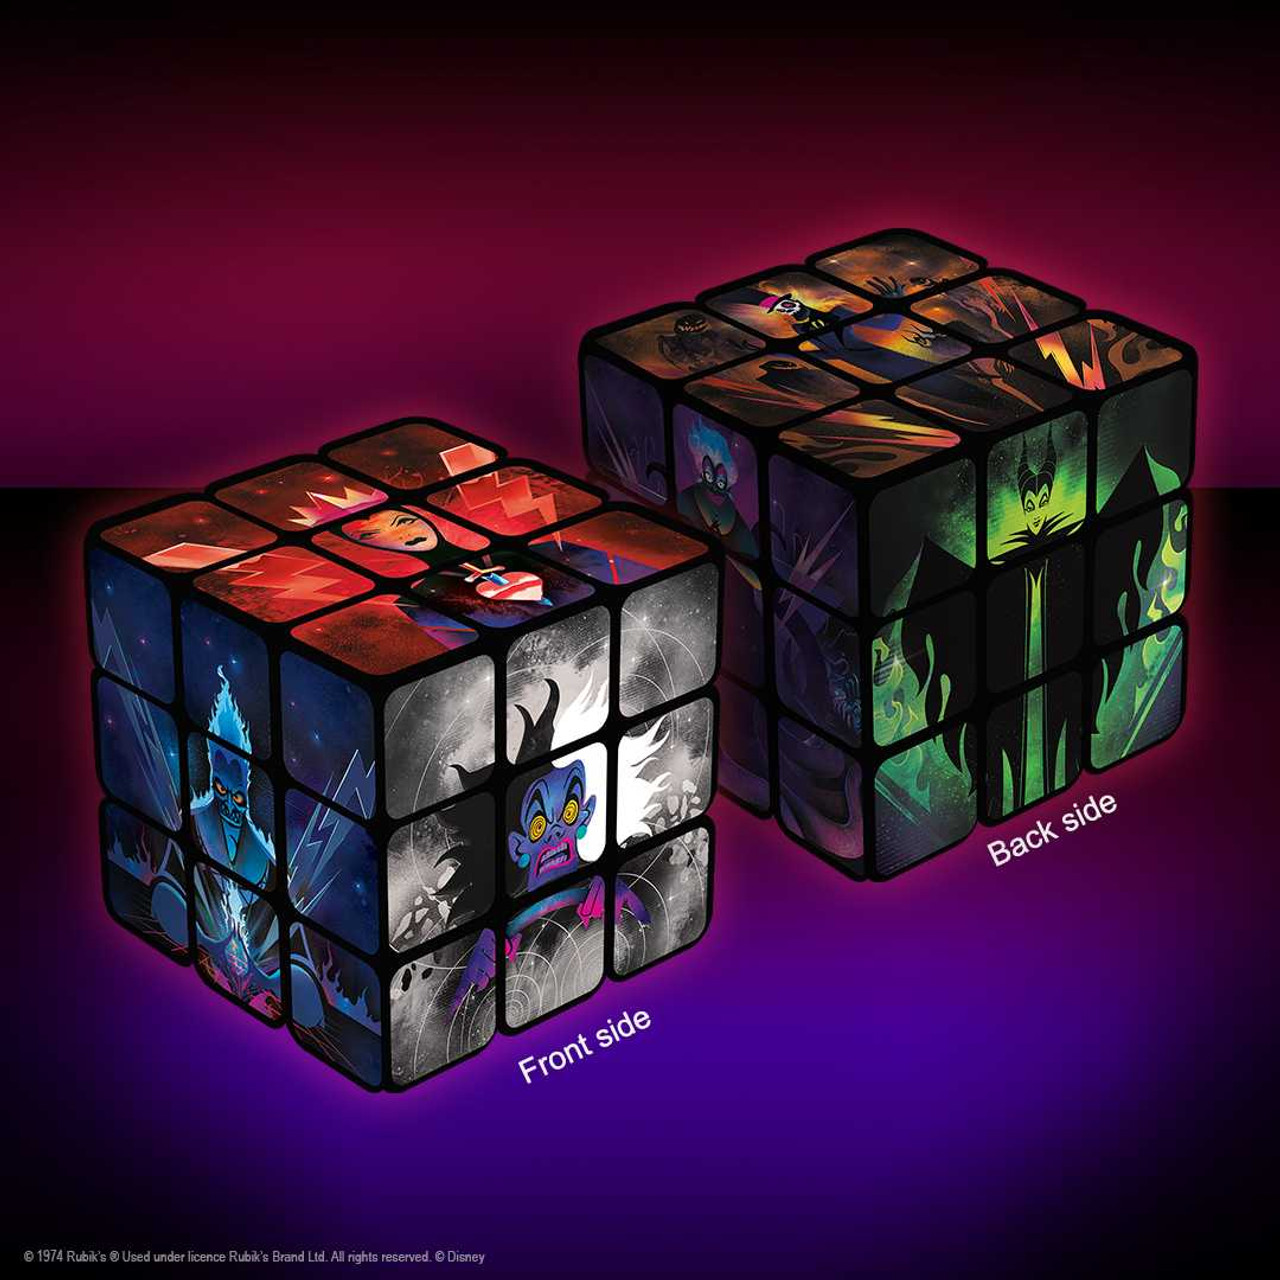 Rubiks Cube–The Original 3x3 Puzzle - Board Game Barrister